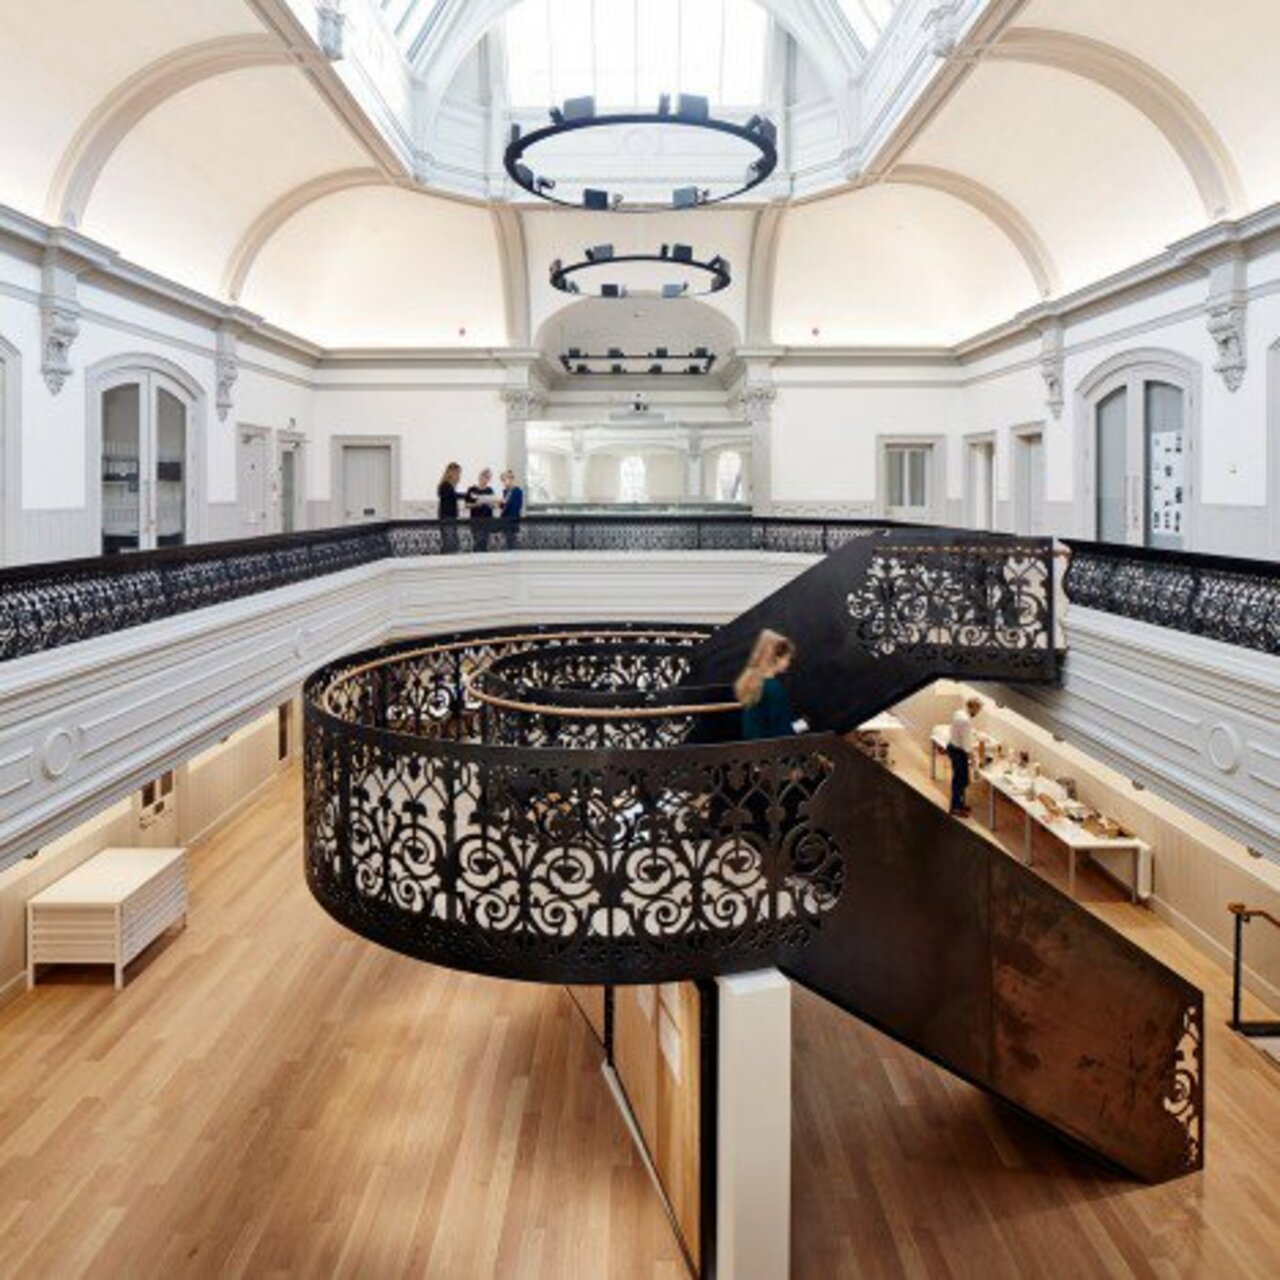 Of course, a #architecture school would have such a stunning elaborate #staircase and #balustrade. https://t.co/JPhltXnGll